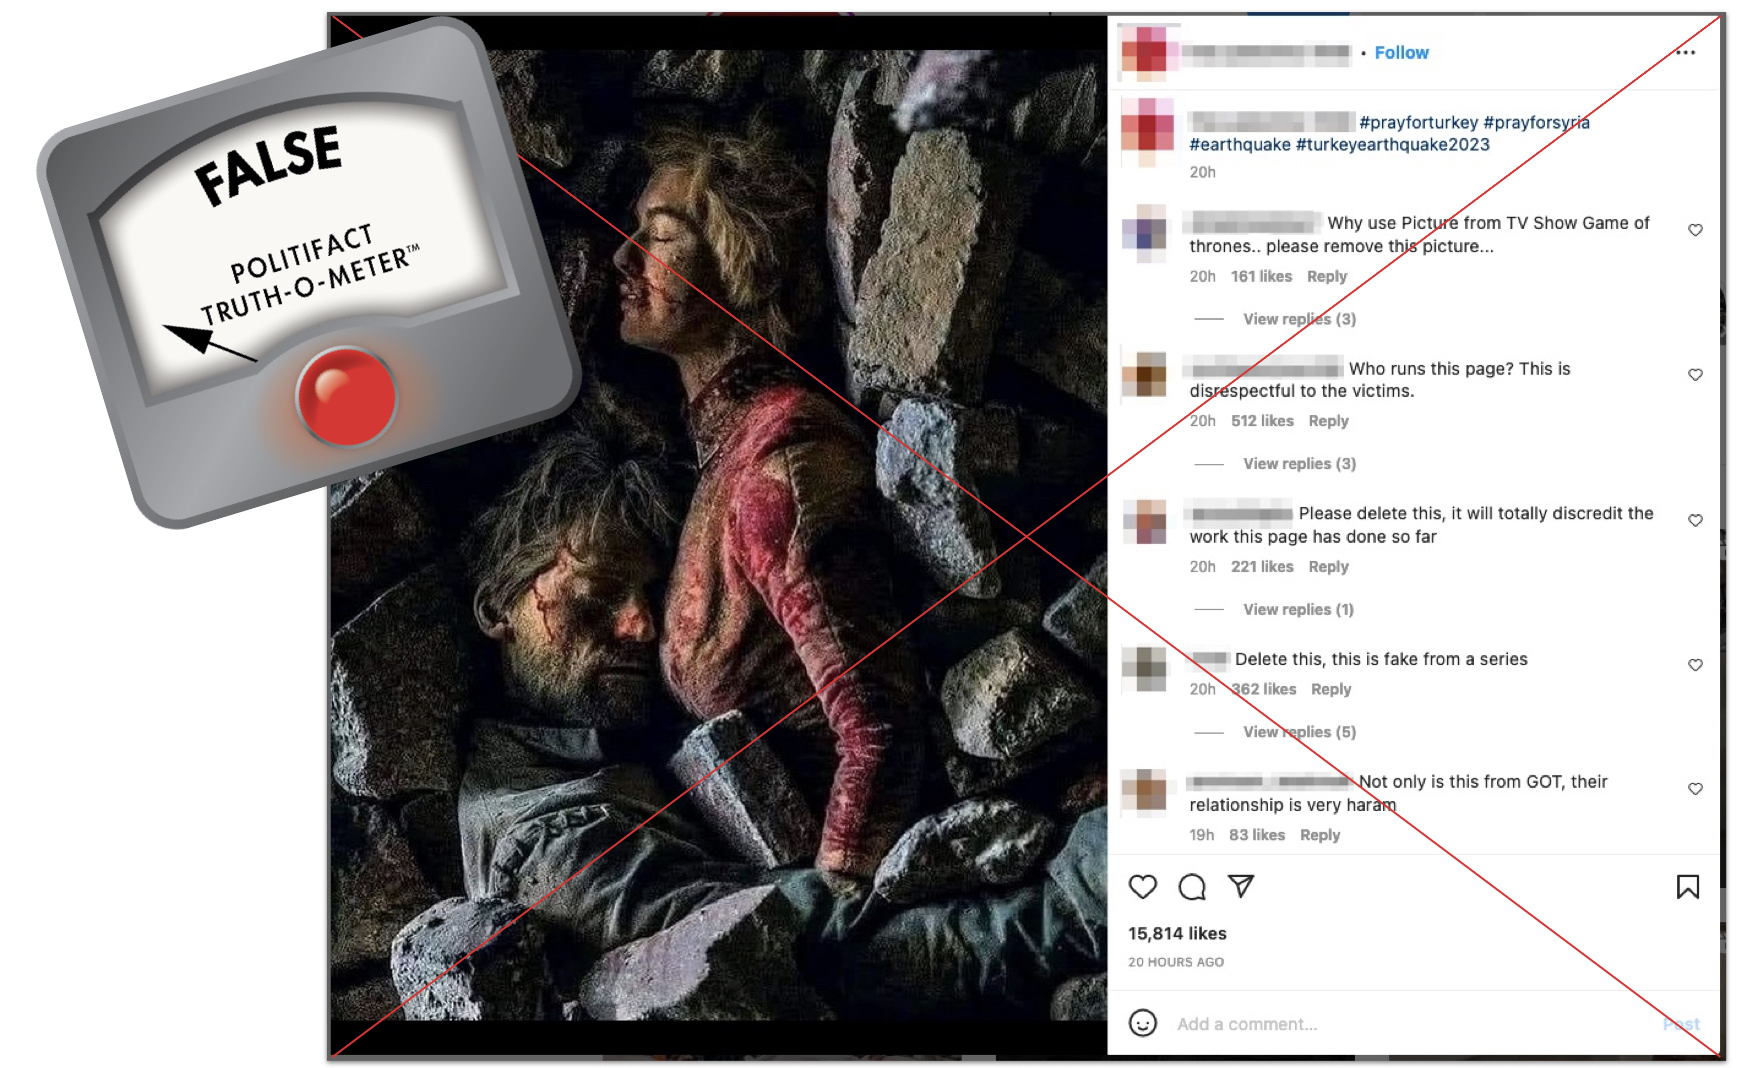 Fact Check: Instagram posts – Photo shows Game of Thrones characters, not victims of earthquake in Turkey, Syria